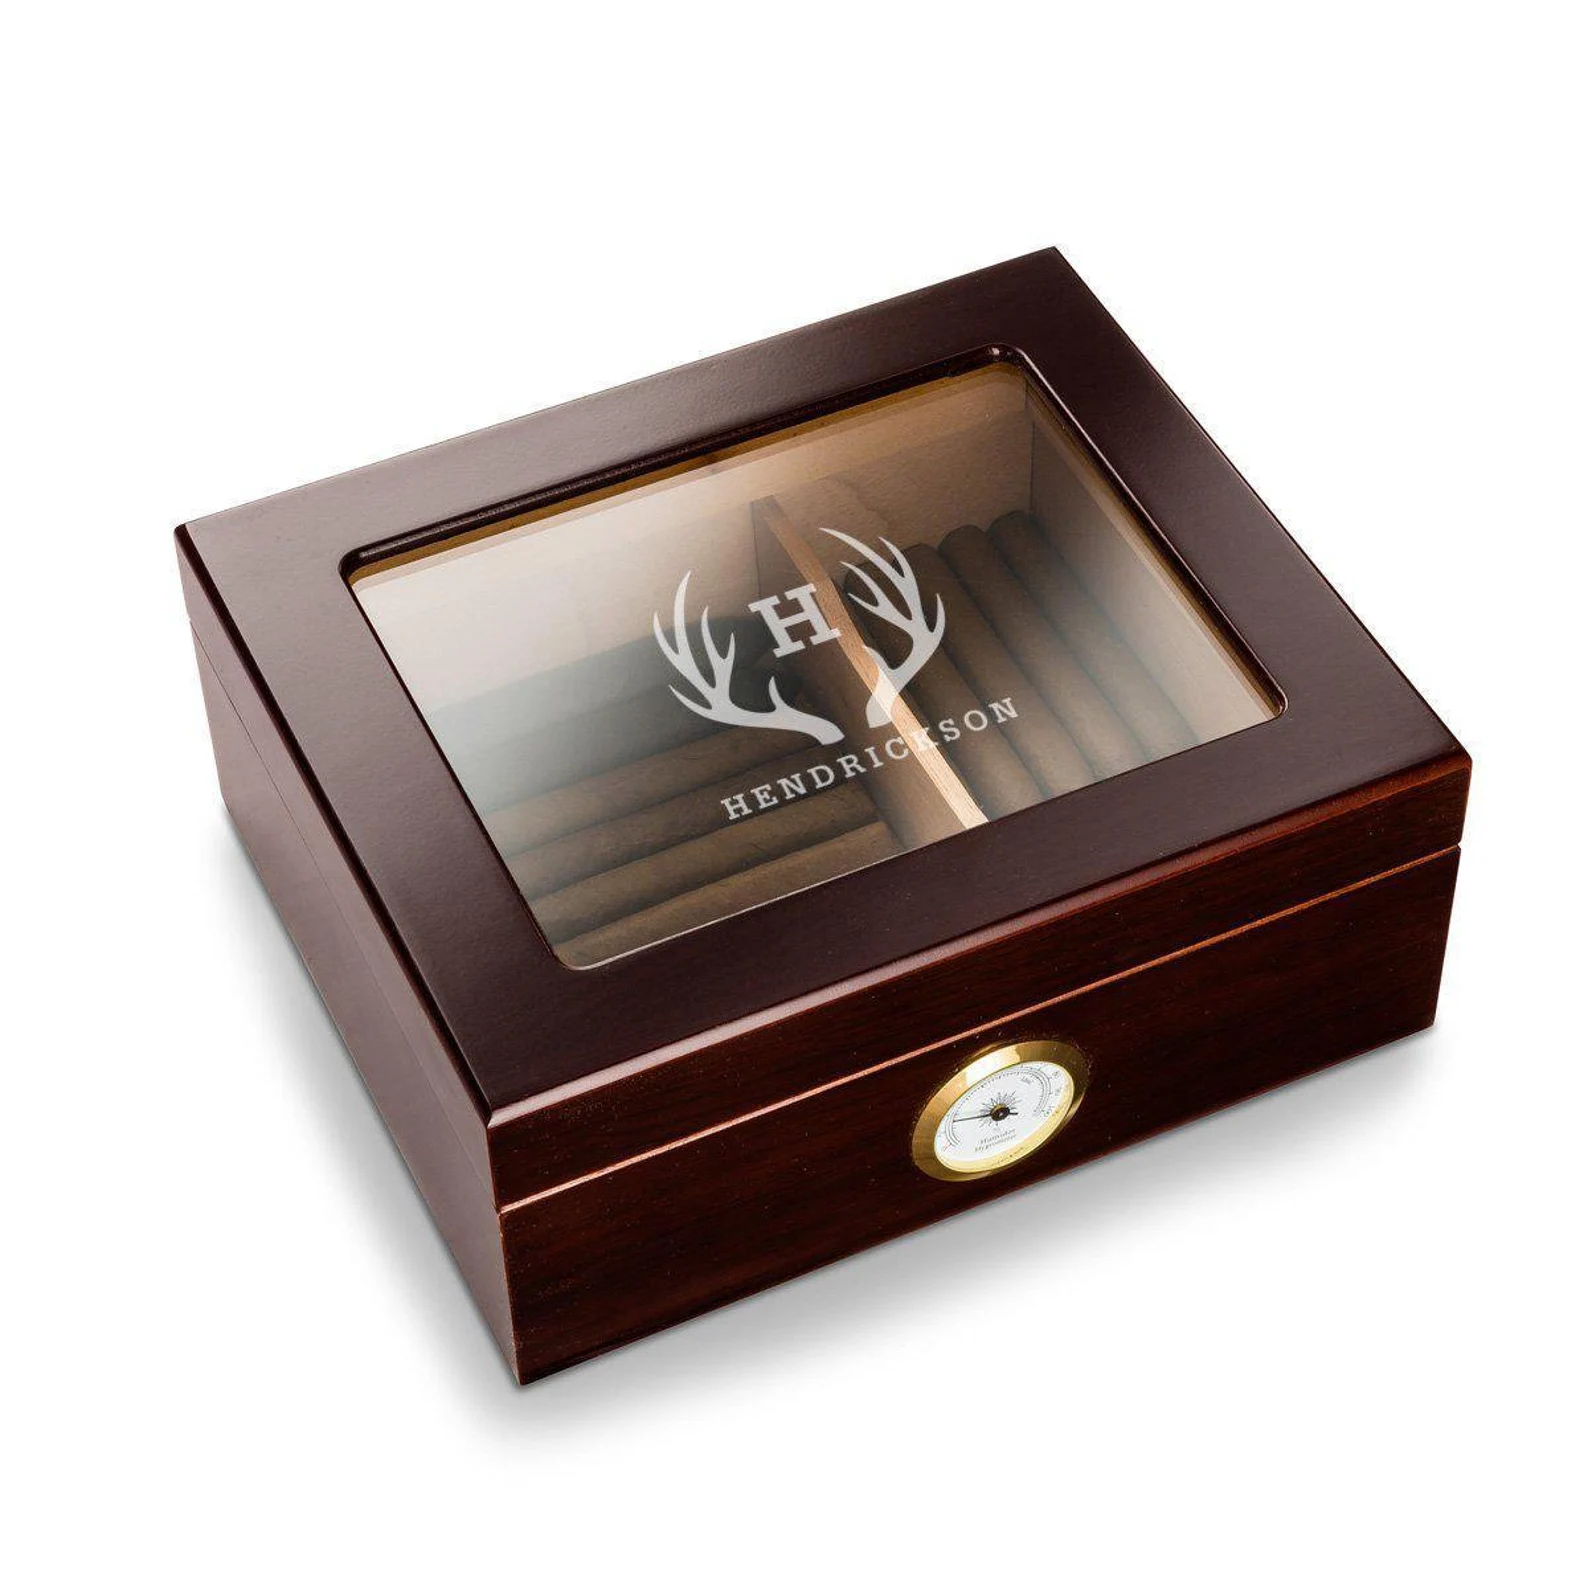 Engraved glass top cigar humidor by MagicwoodShop